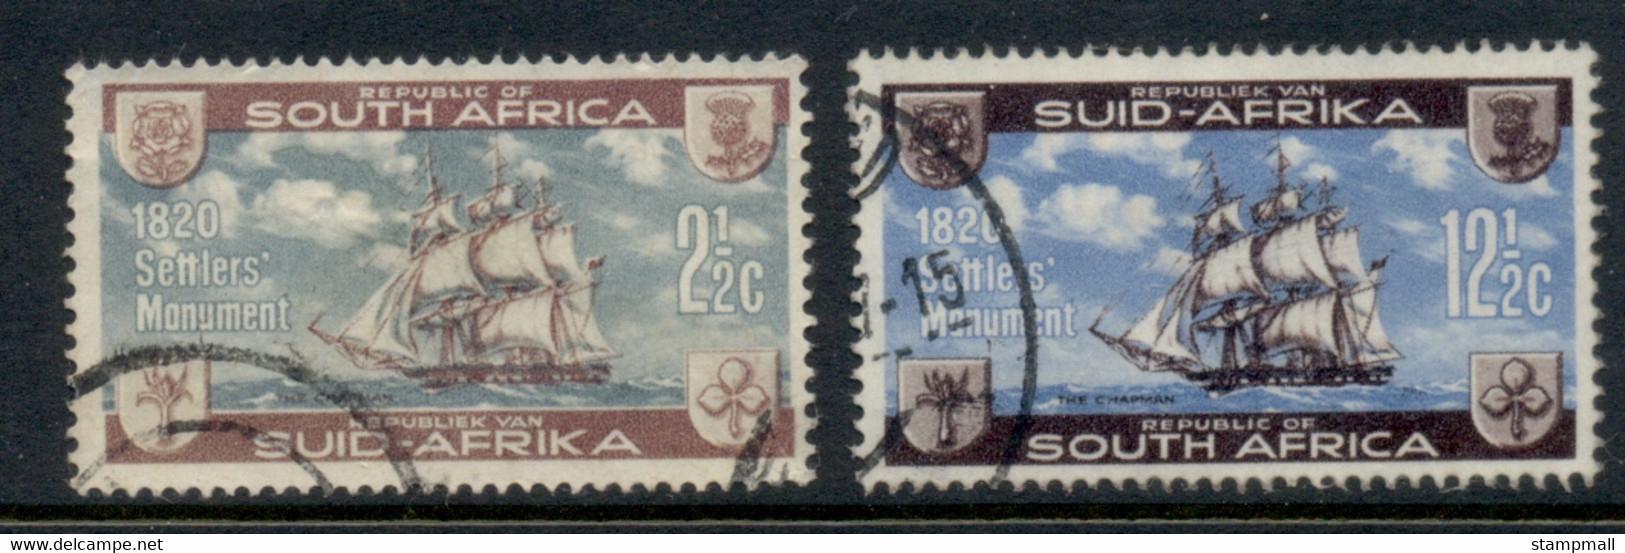 South Africa 1962 British Settlers Monument FU - Unused Stamps